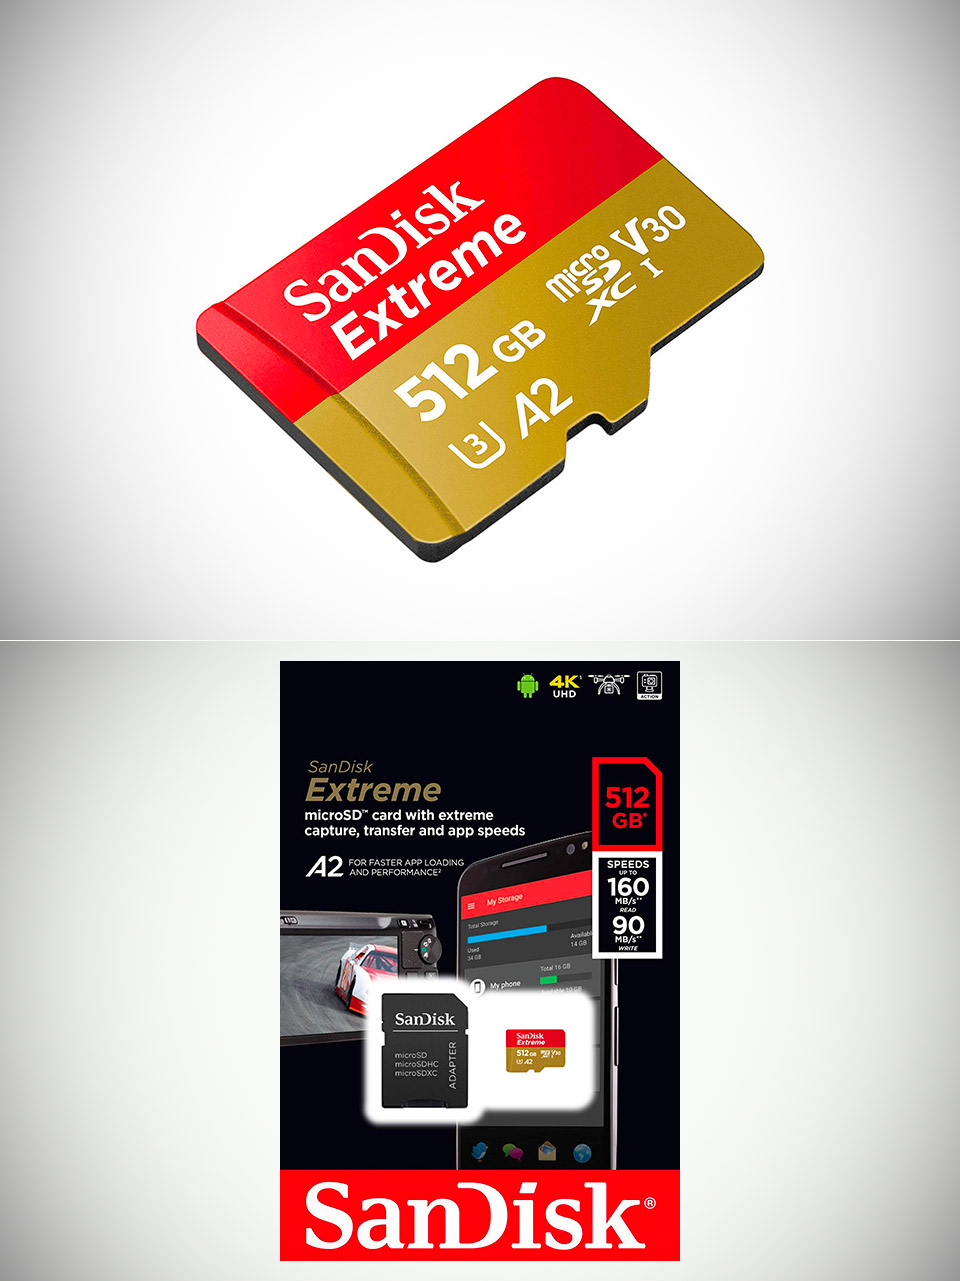 Don't Pay $200, Get SanDisk's 512GB Extreme MicroSDXC UHS-I Memory